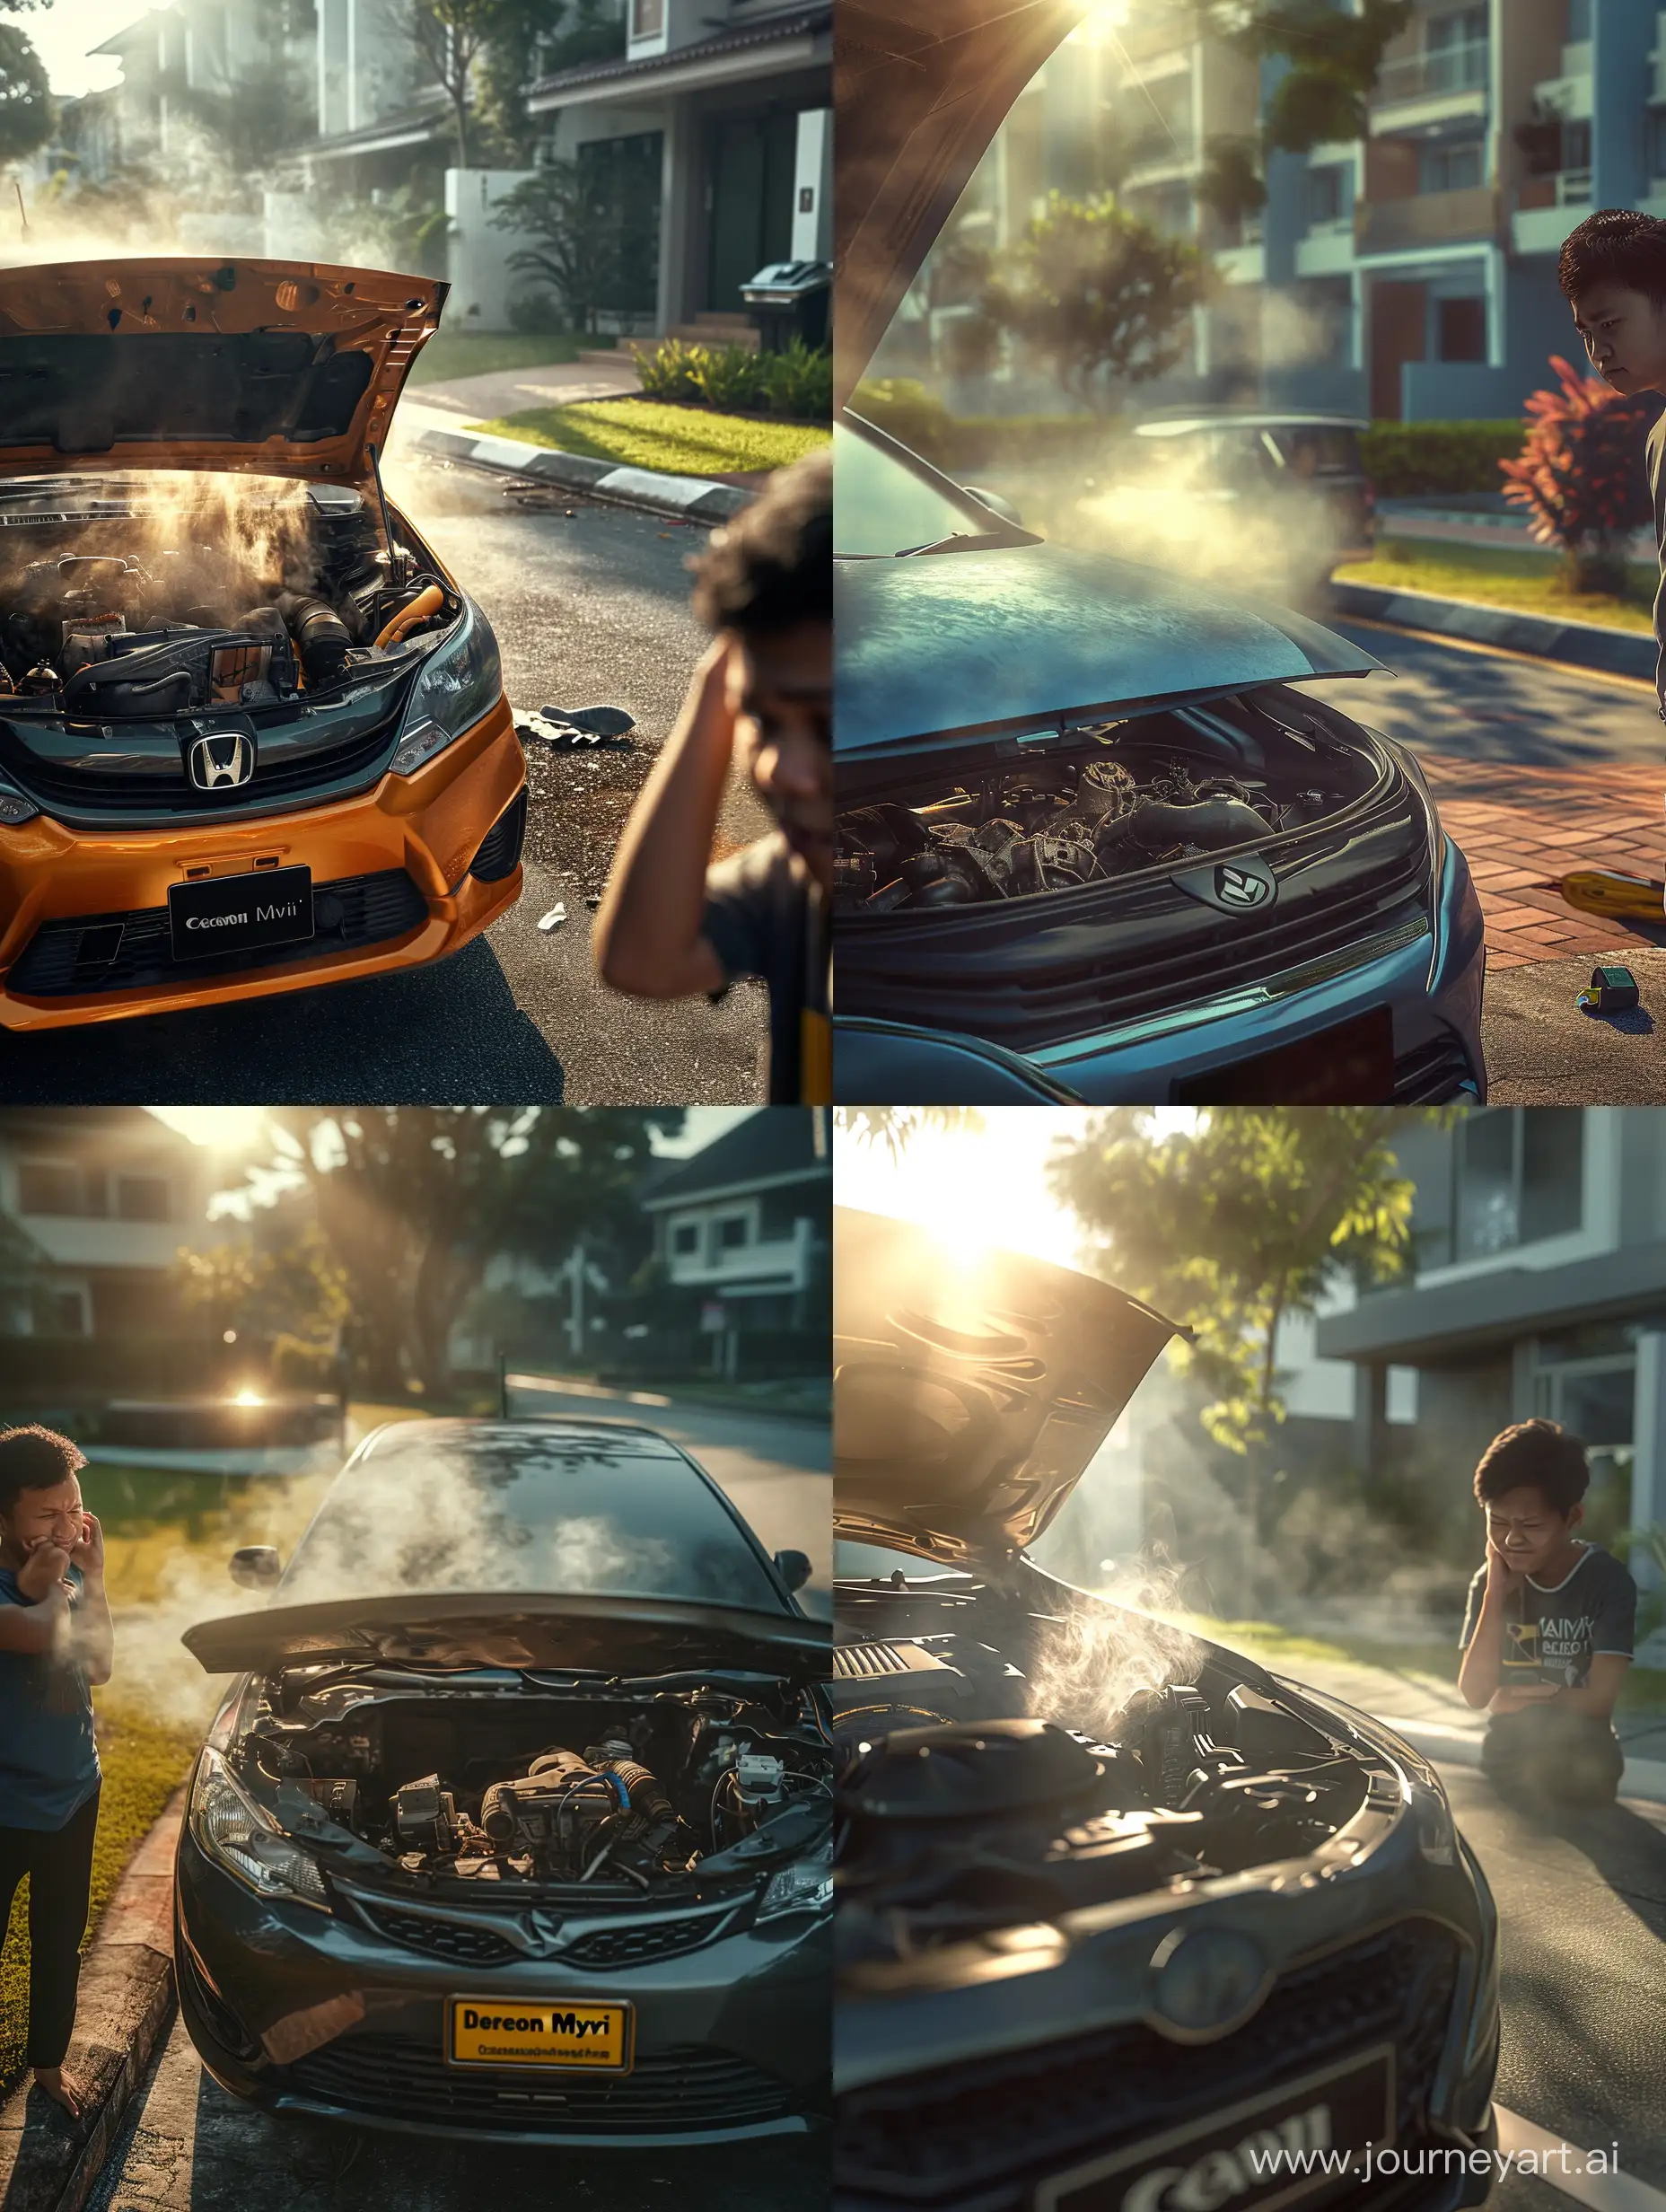 Ultra realistic, close up, car broke down on the side of the road. The front bonnet was open and there was smoke coming out of the car engine. Perodua myvi brand car made in Malaysia. A Malay youth looked at the car engine with a sad face while scratching his head with one hand. atmosphere in a modern housing estate. refraction of sunlight. canon eos-id x mark iii dslr --v 6.0